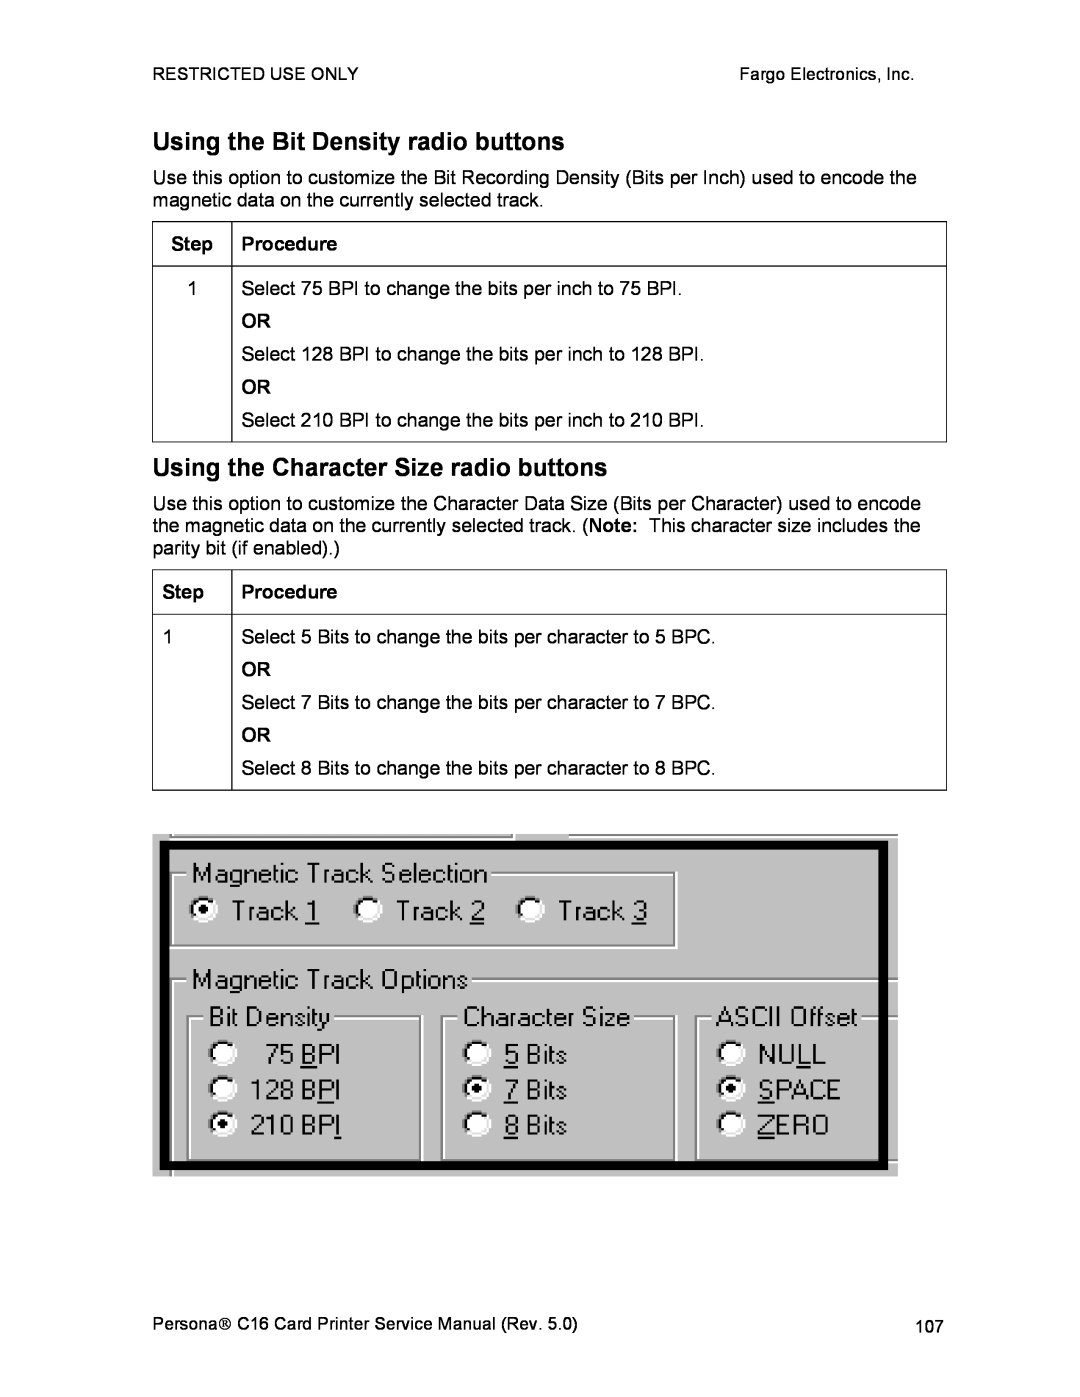 FARGO electronic C16 service manual Using the Bit Density radio buttons, Using the Character Size radio buttons 